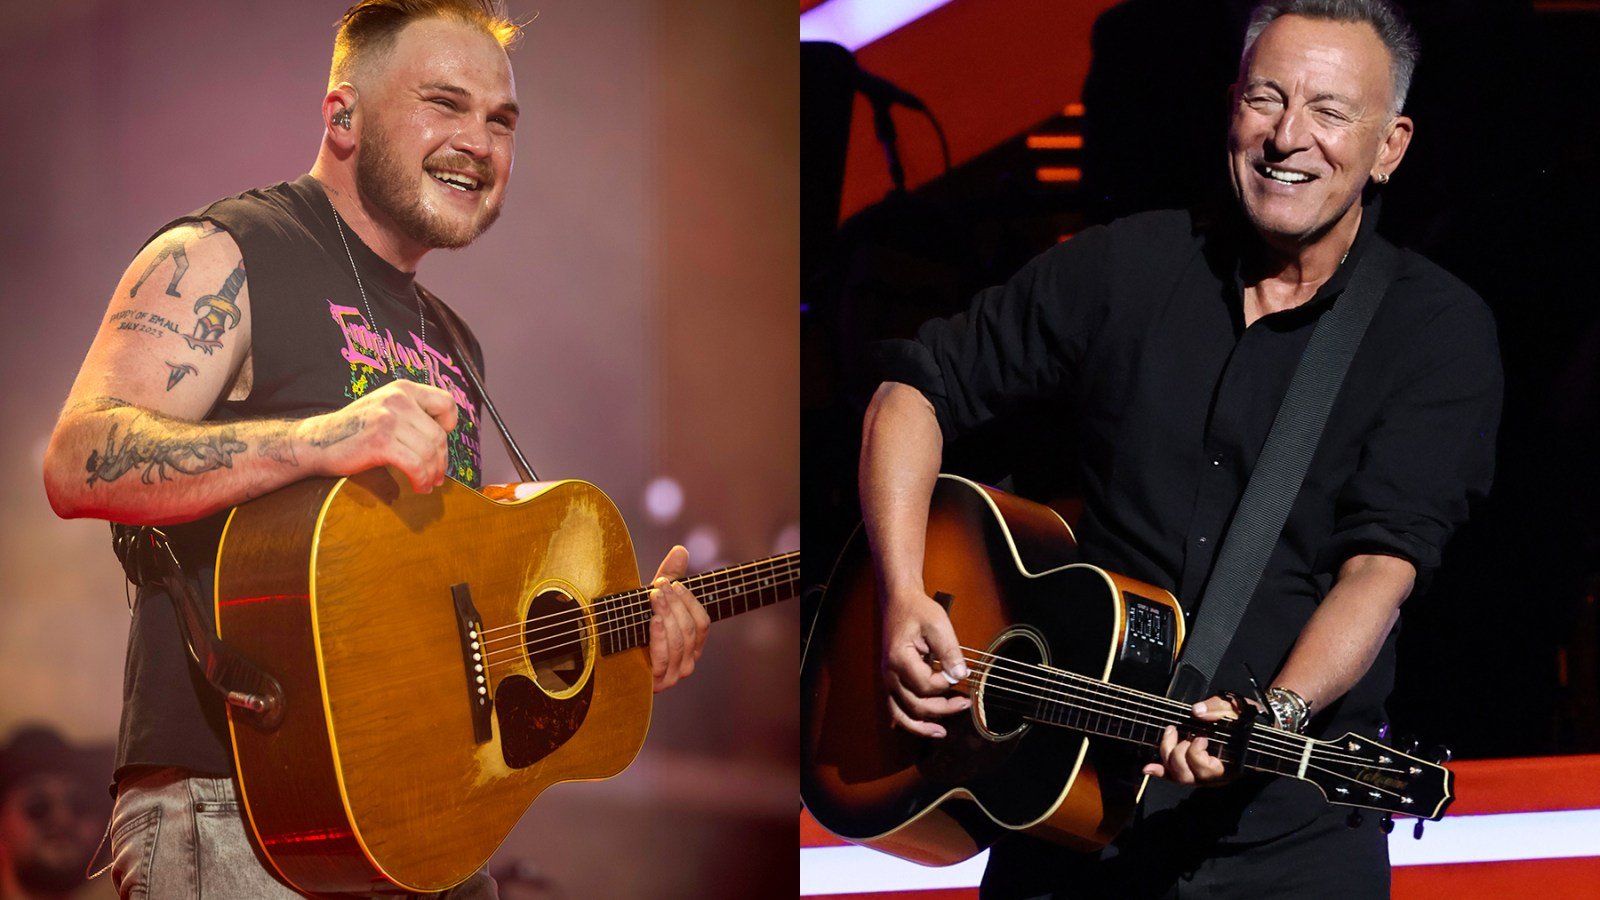 Zach Bryan Helps Bruce Springsteen Make His First Ever Appearance on the Country Charts